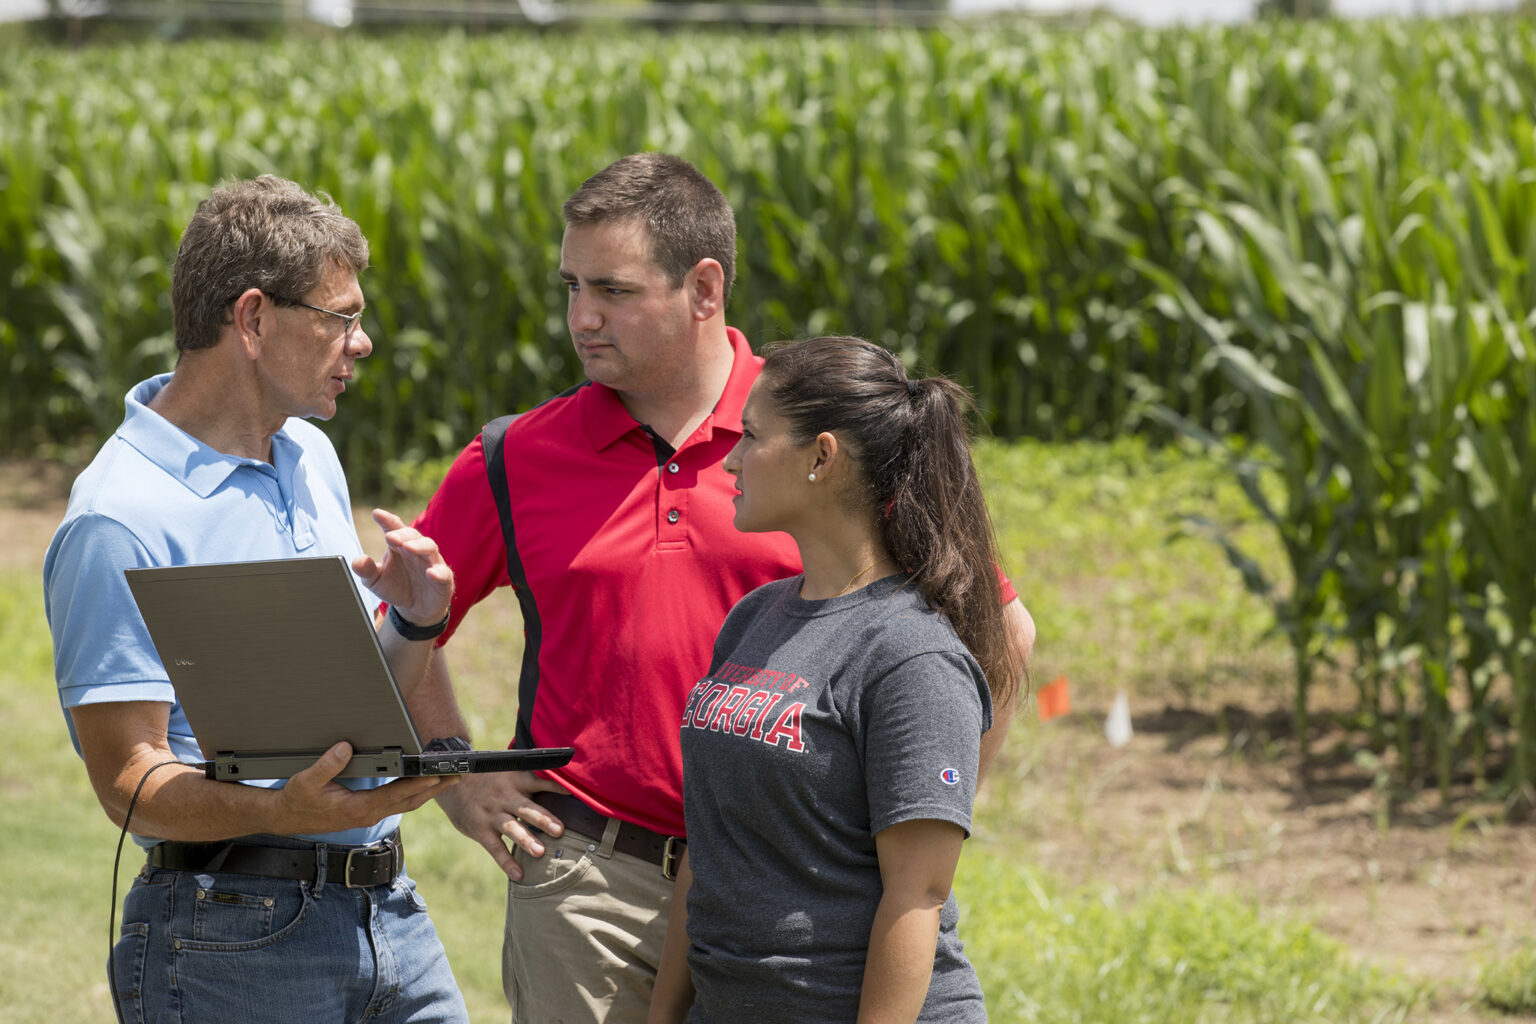 George Vellidis, a professor in the department of crop and soil sciences and University Professor, reviews surface water runoff data with students at the UGA Tifton campus. (Photo by Andrew Davis Tucker/UGA)